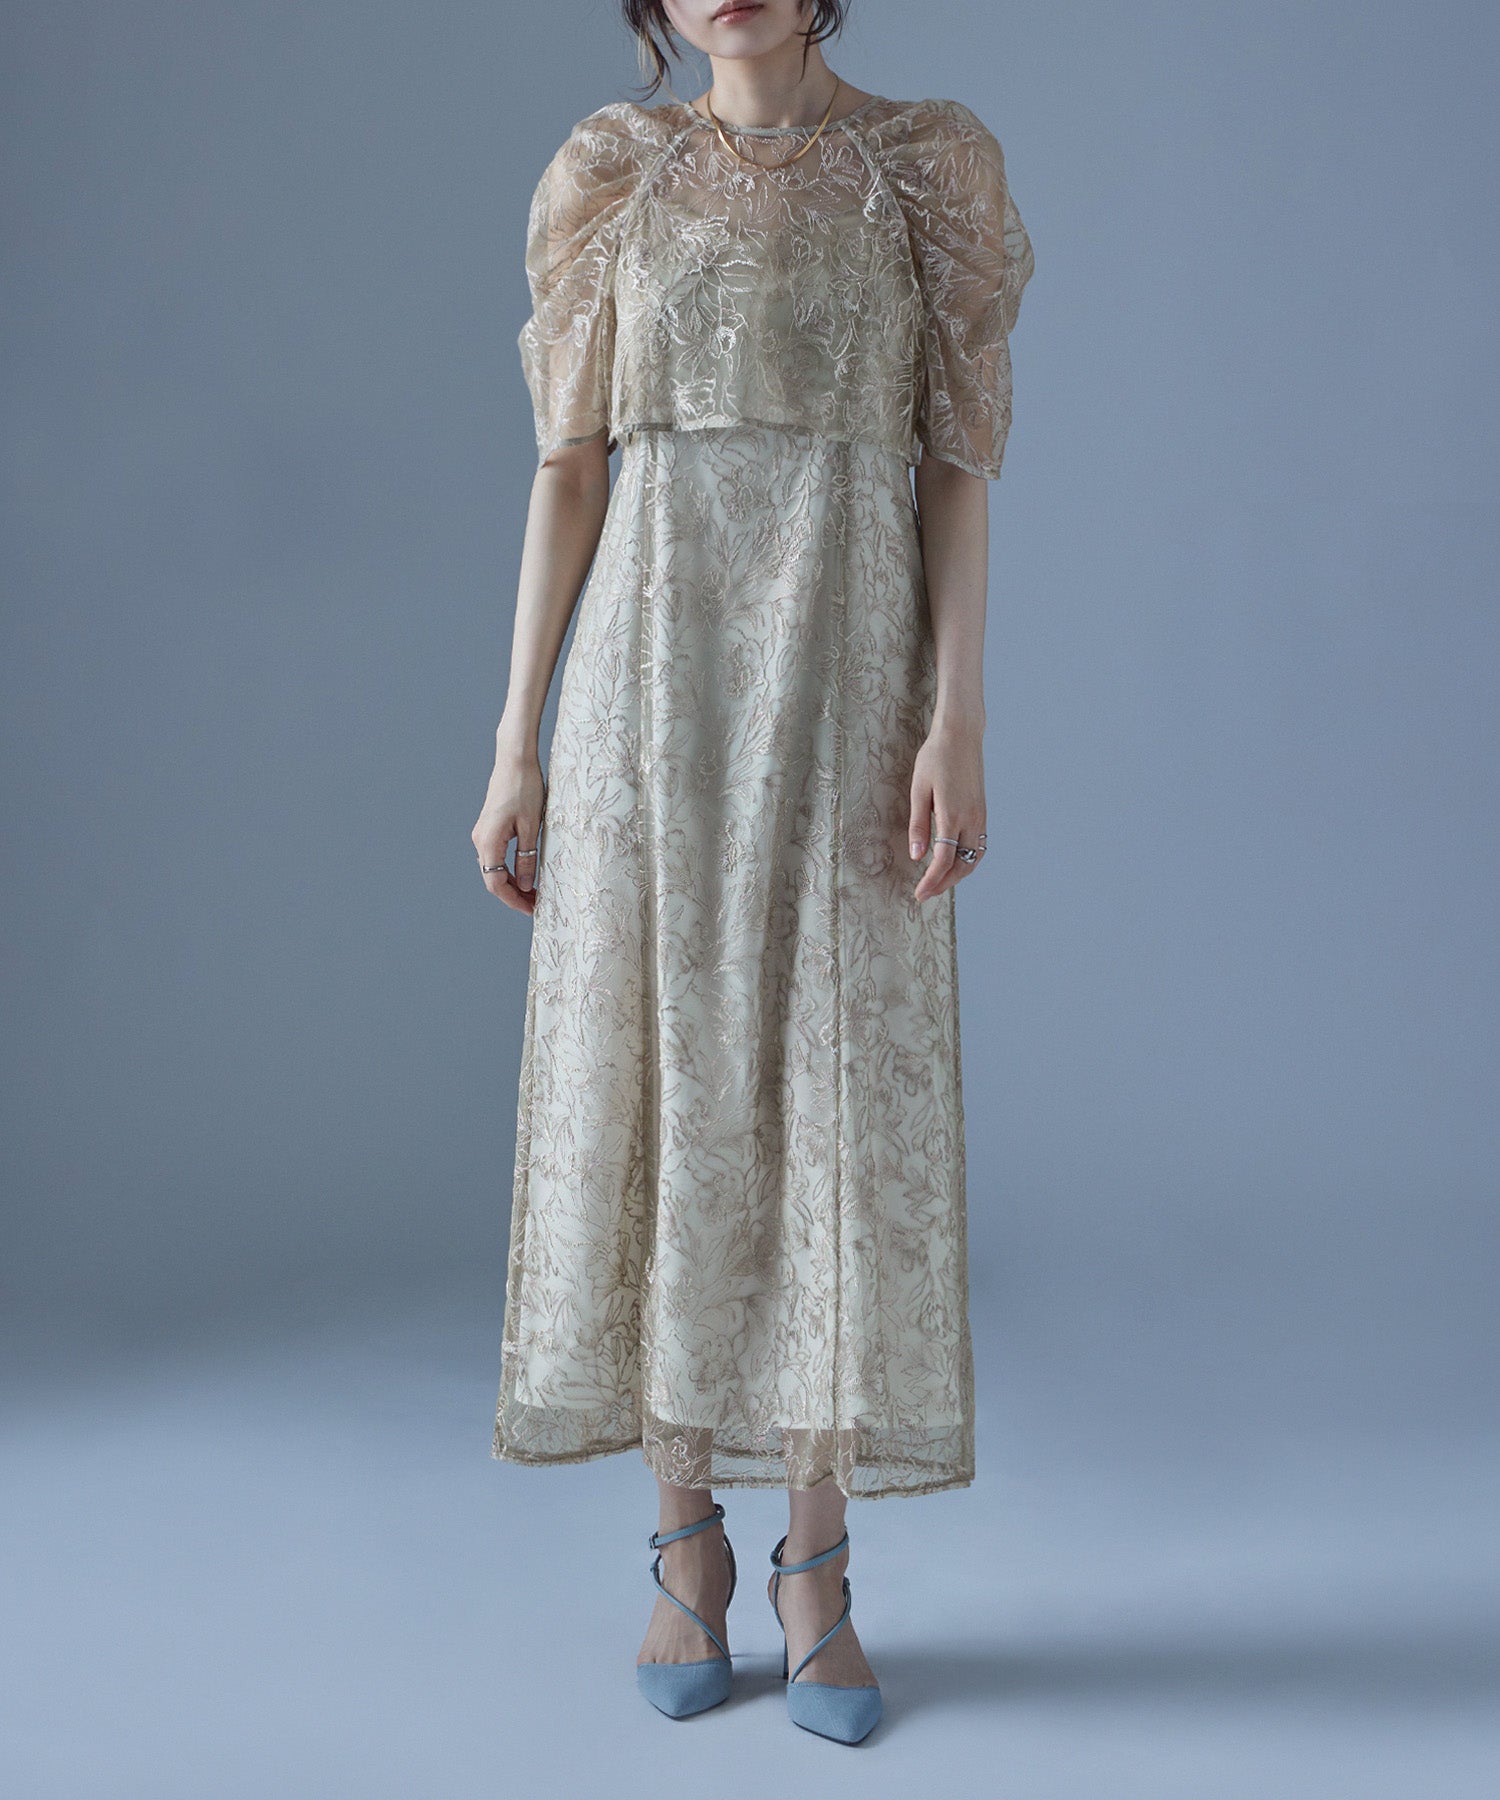 Embroidered lace layered dress